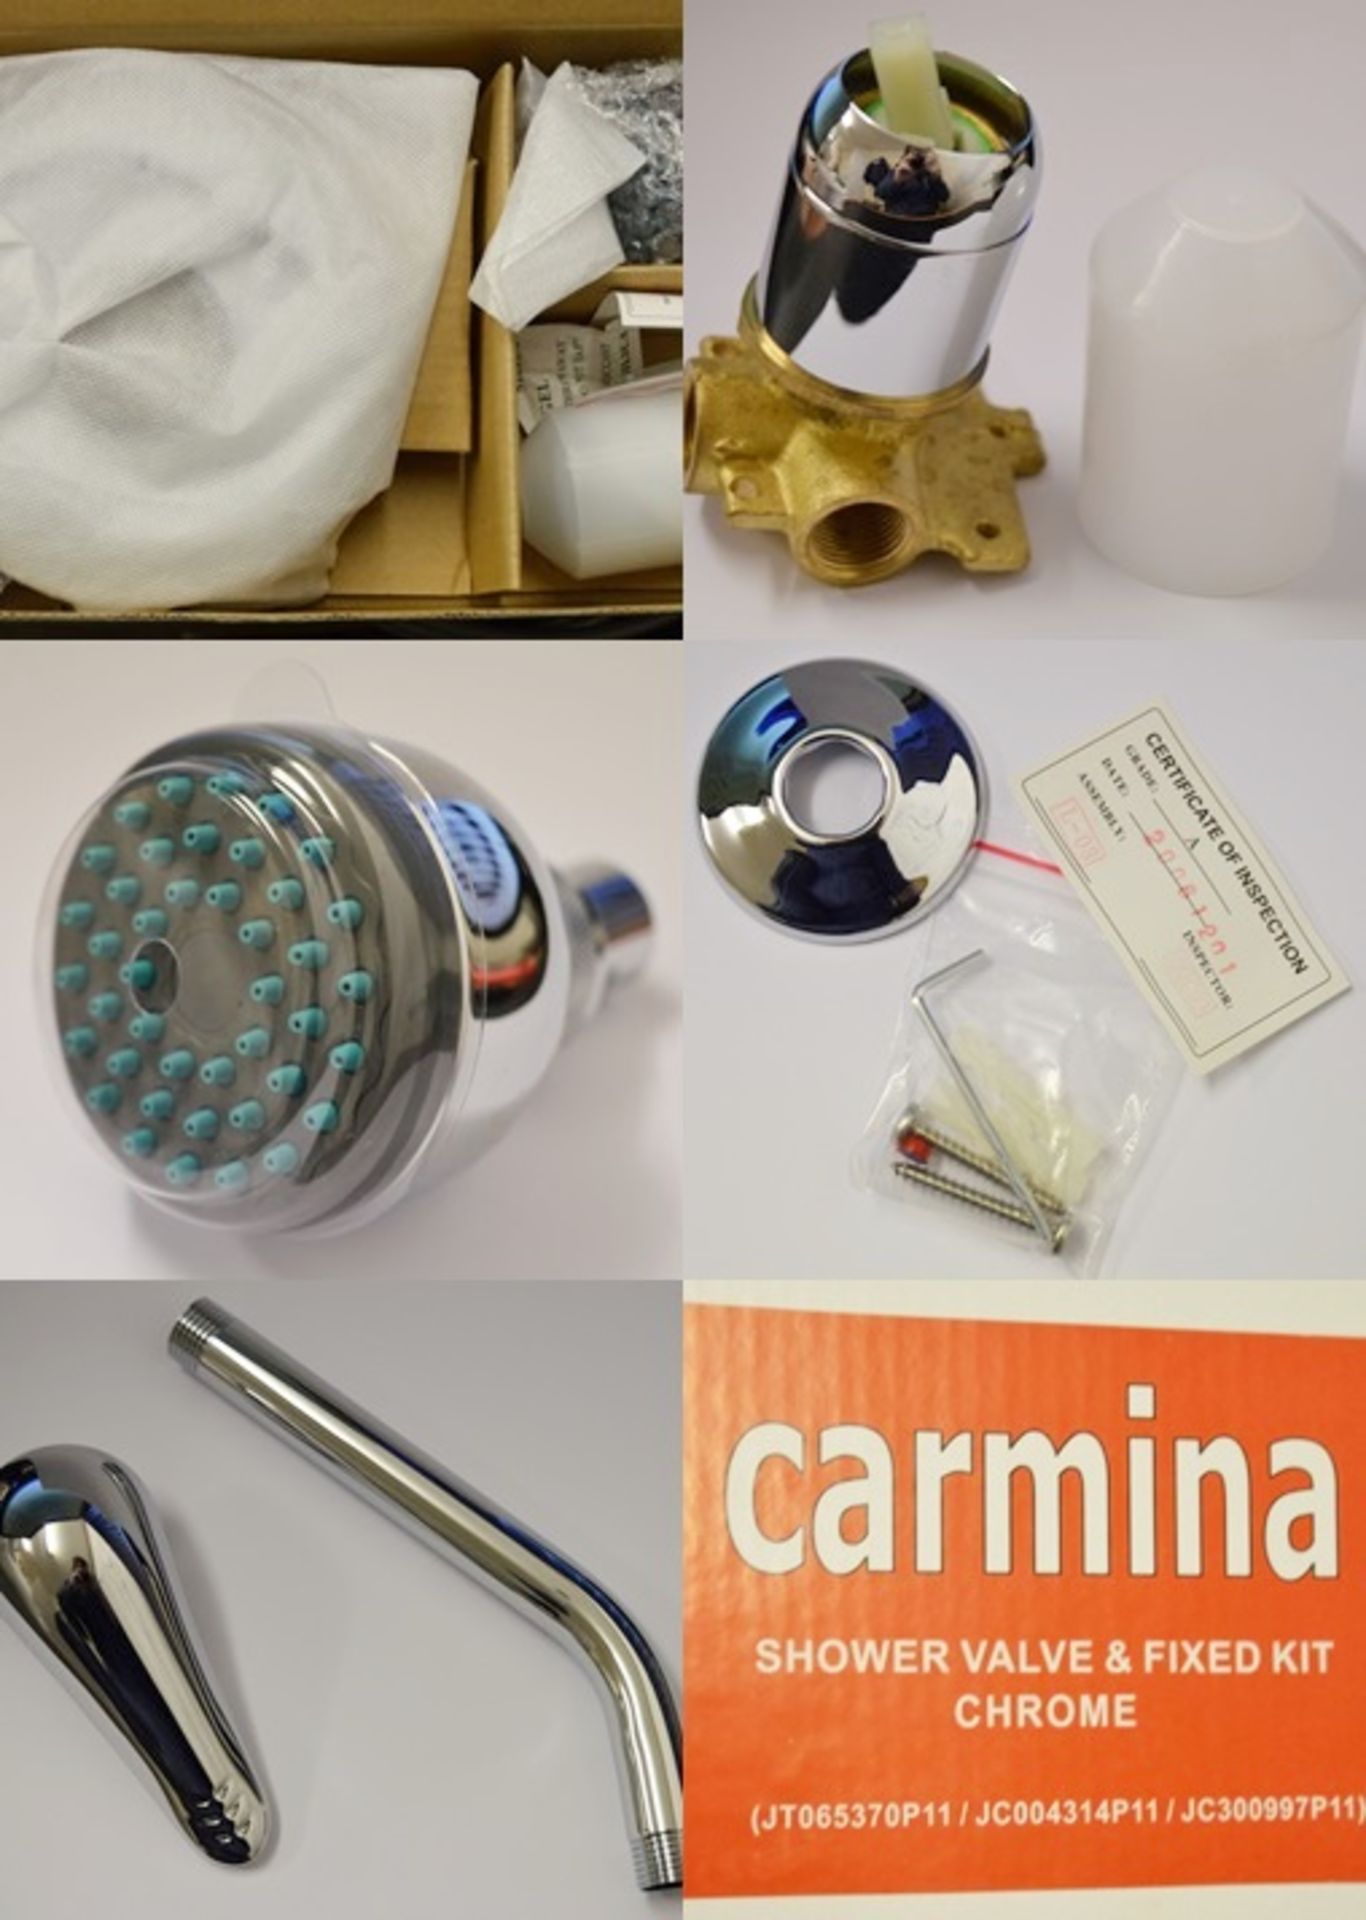 5 x Carmina Shower Valve Kits - Contains Chrome Shower Head, Fixed Arm and Manual Control - Brass - Image 2 of 13